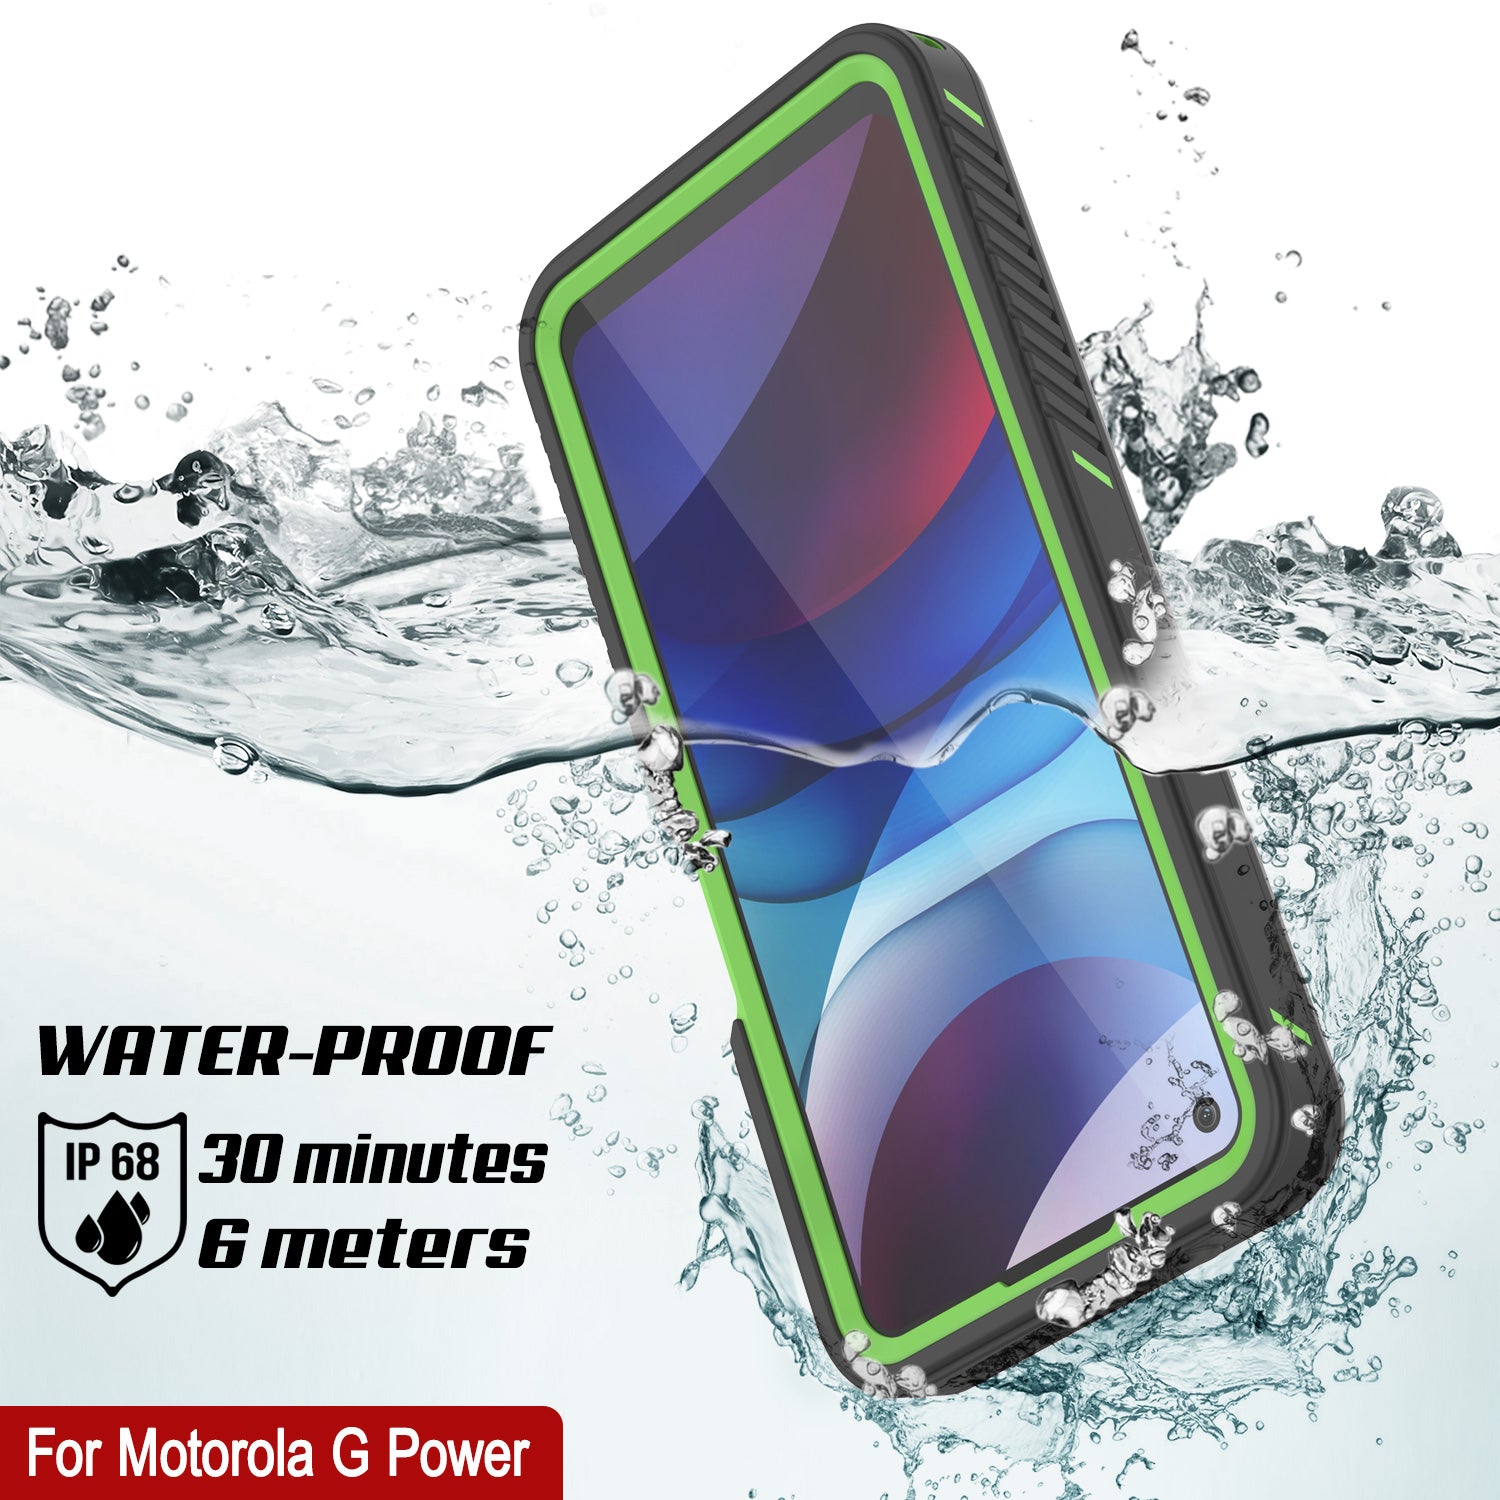 Moto G Power Waterproof Case, Punkcase [Extreme Series] Armor Cover W